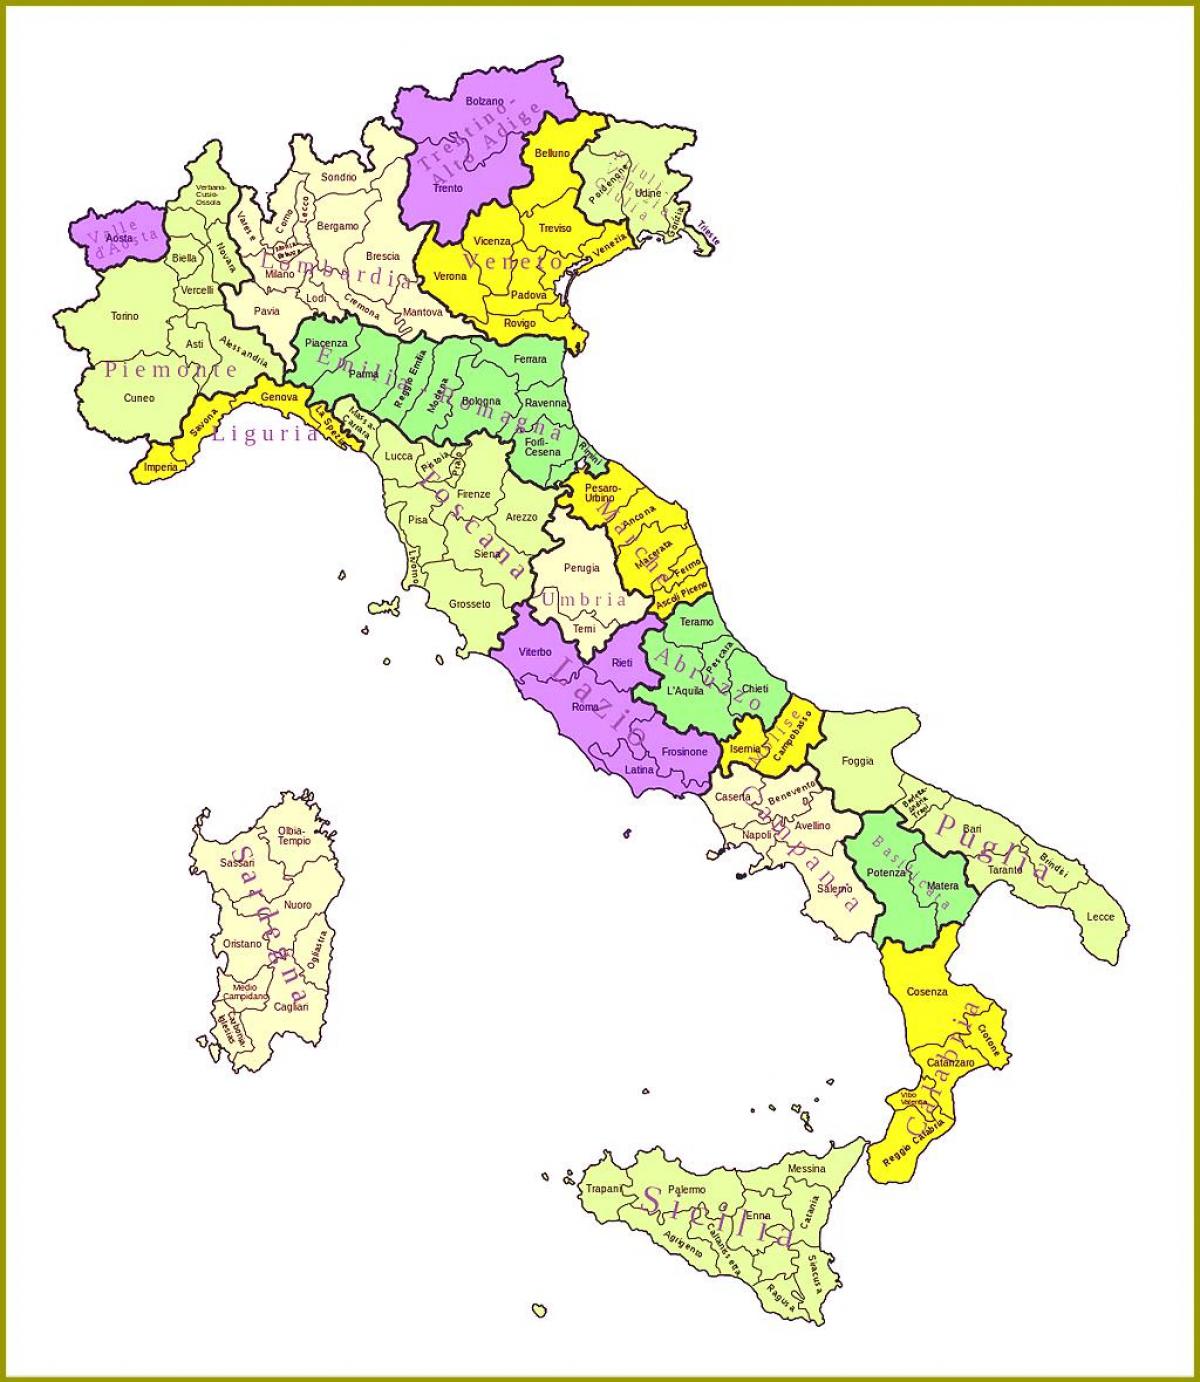 Italy provinces map - Italy map regions provinces (Southern Europe